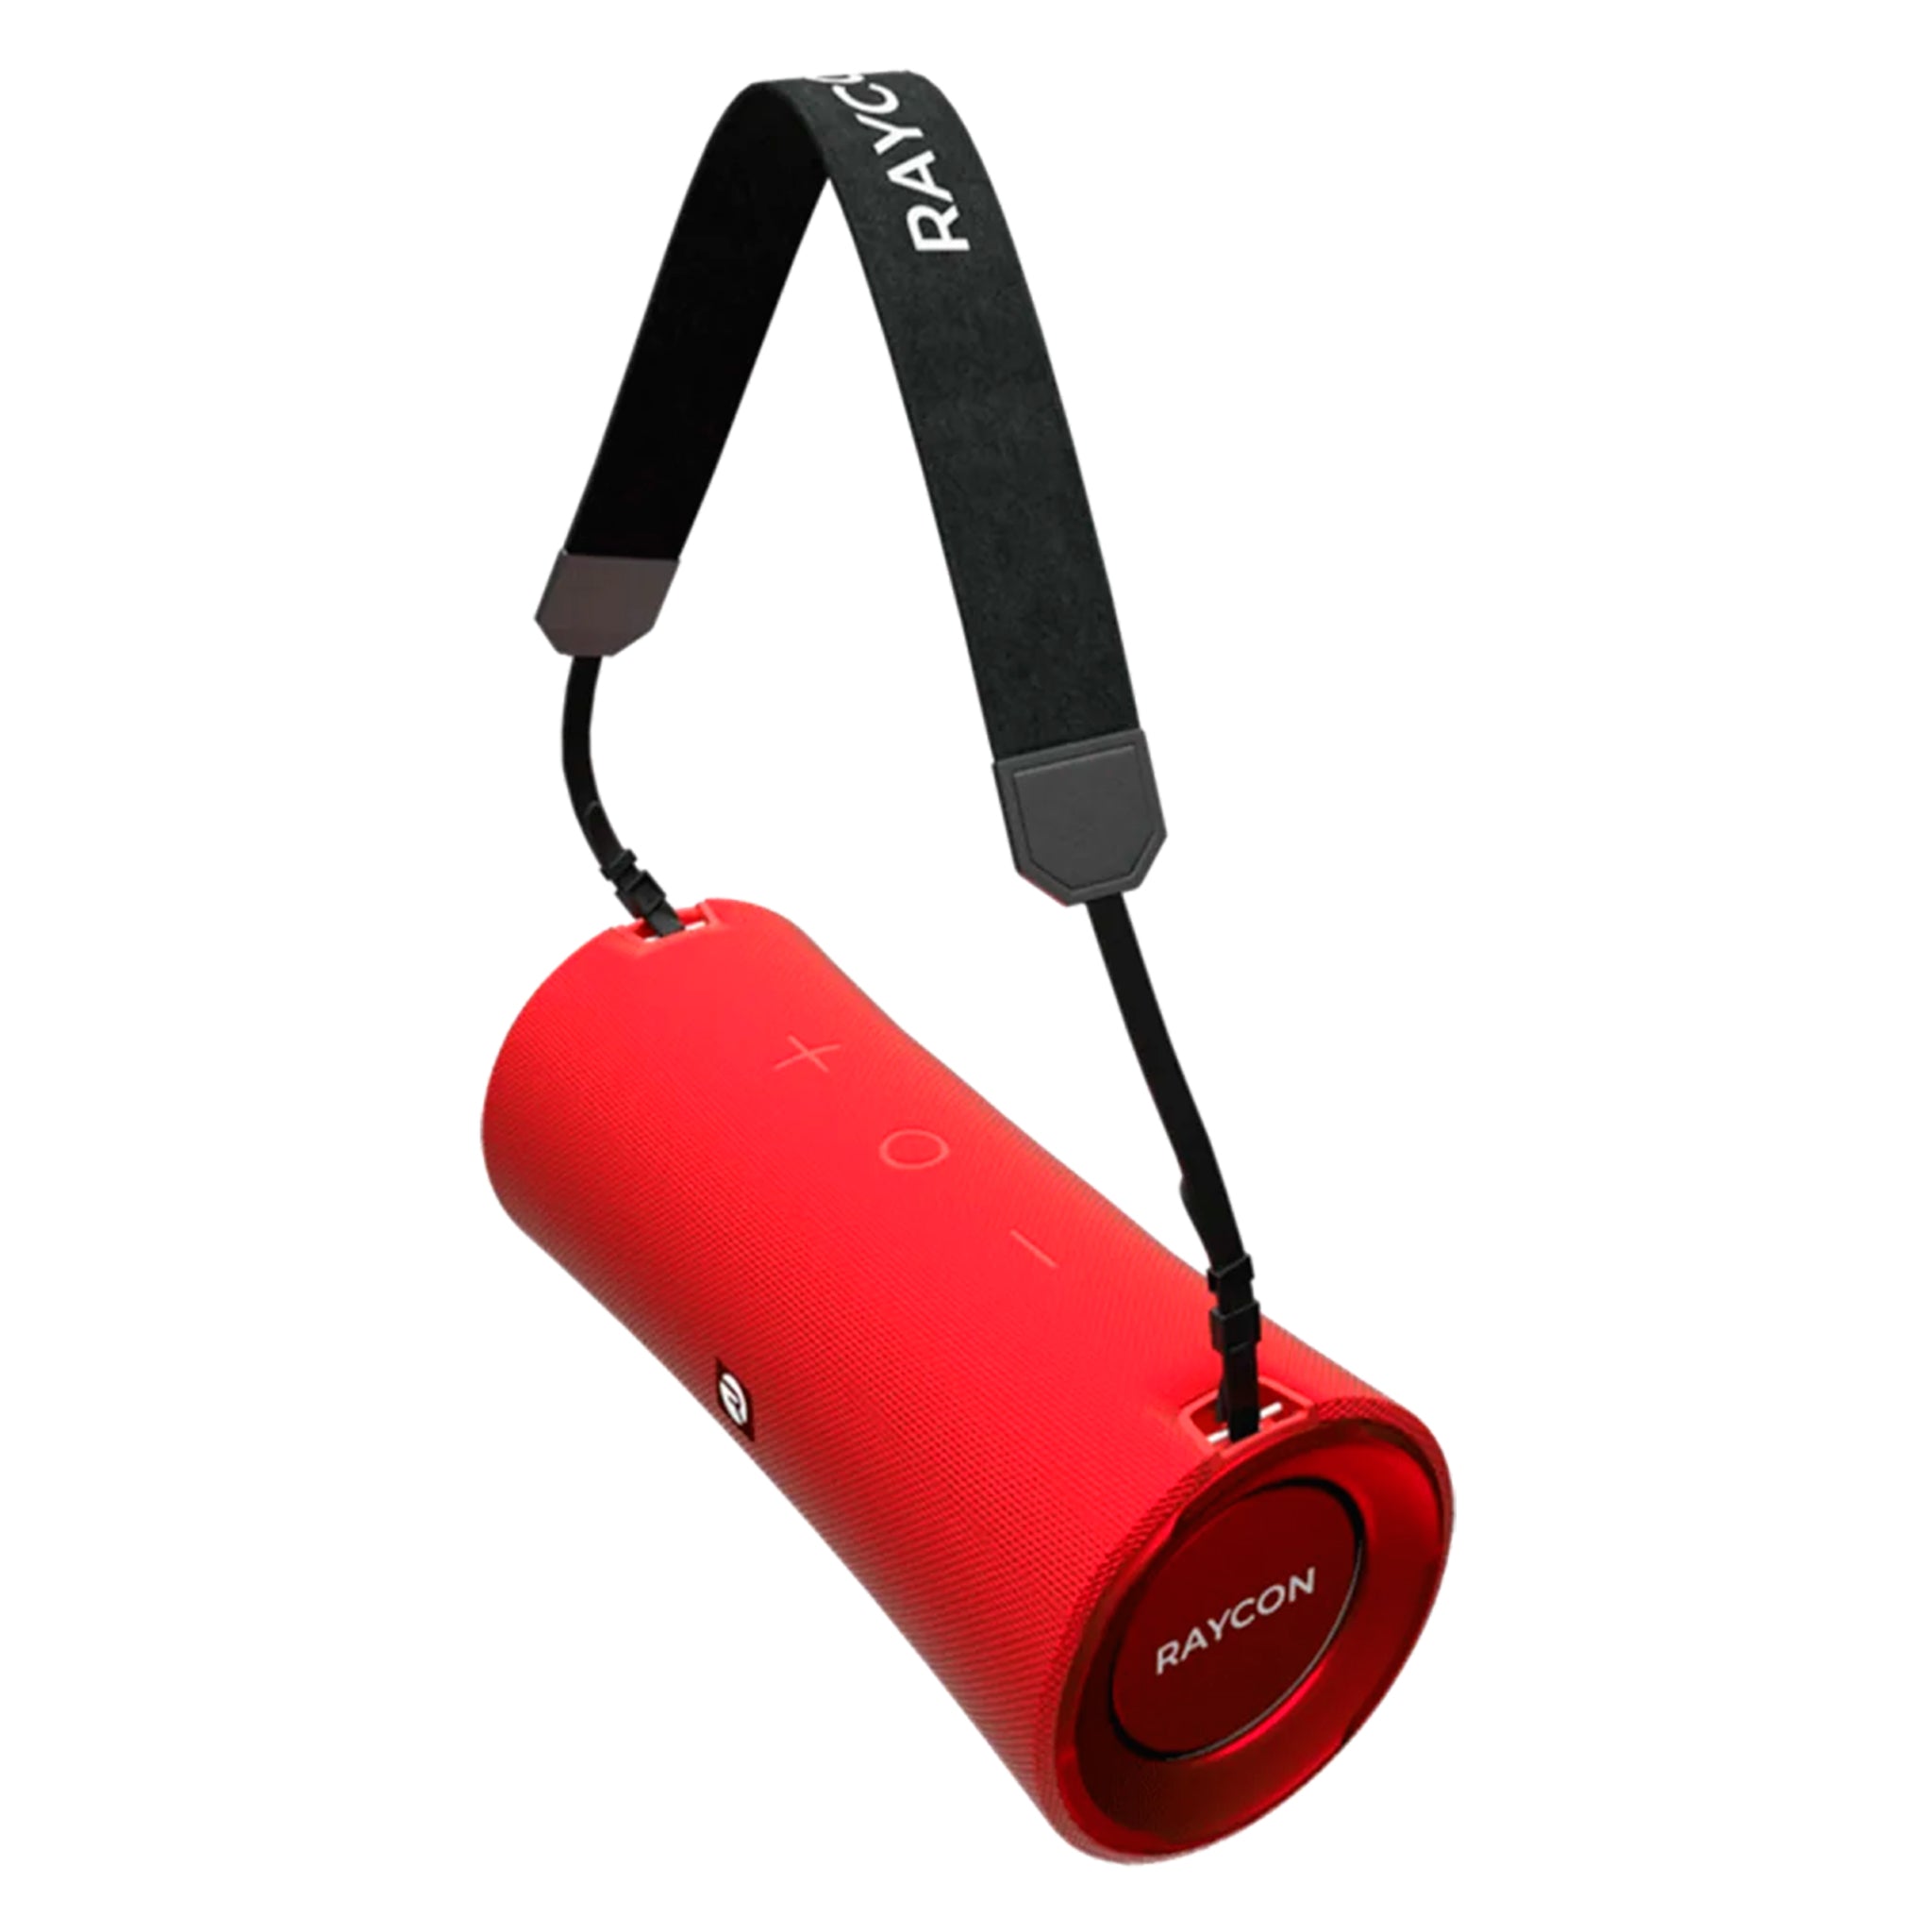 Raycon - The Fitness Bluetooth Speaker - Red